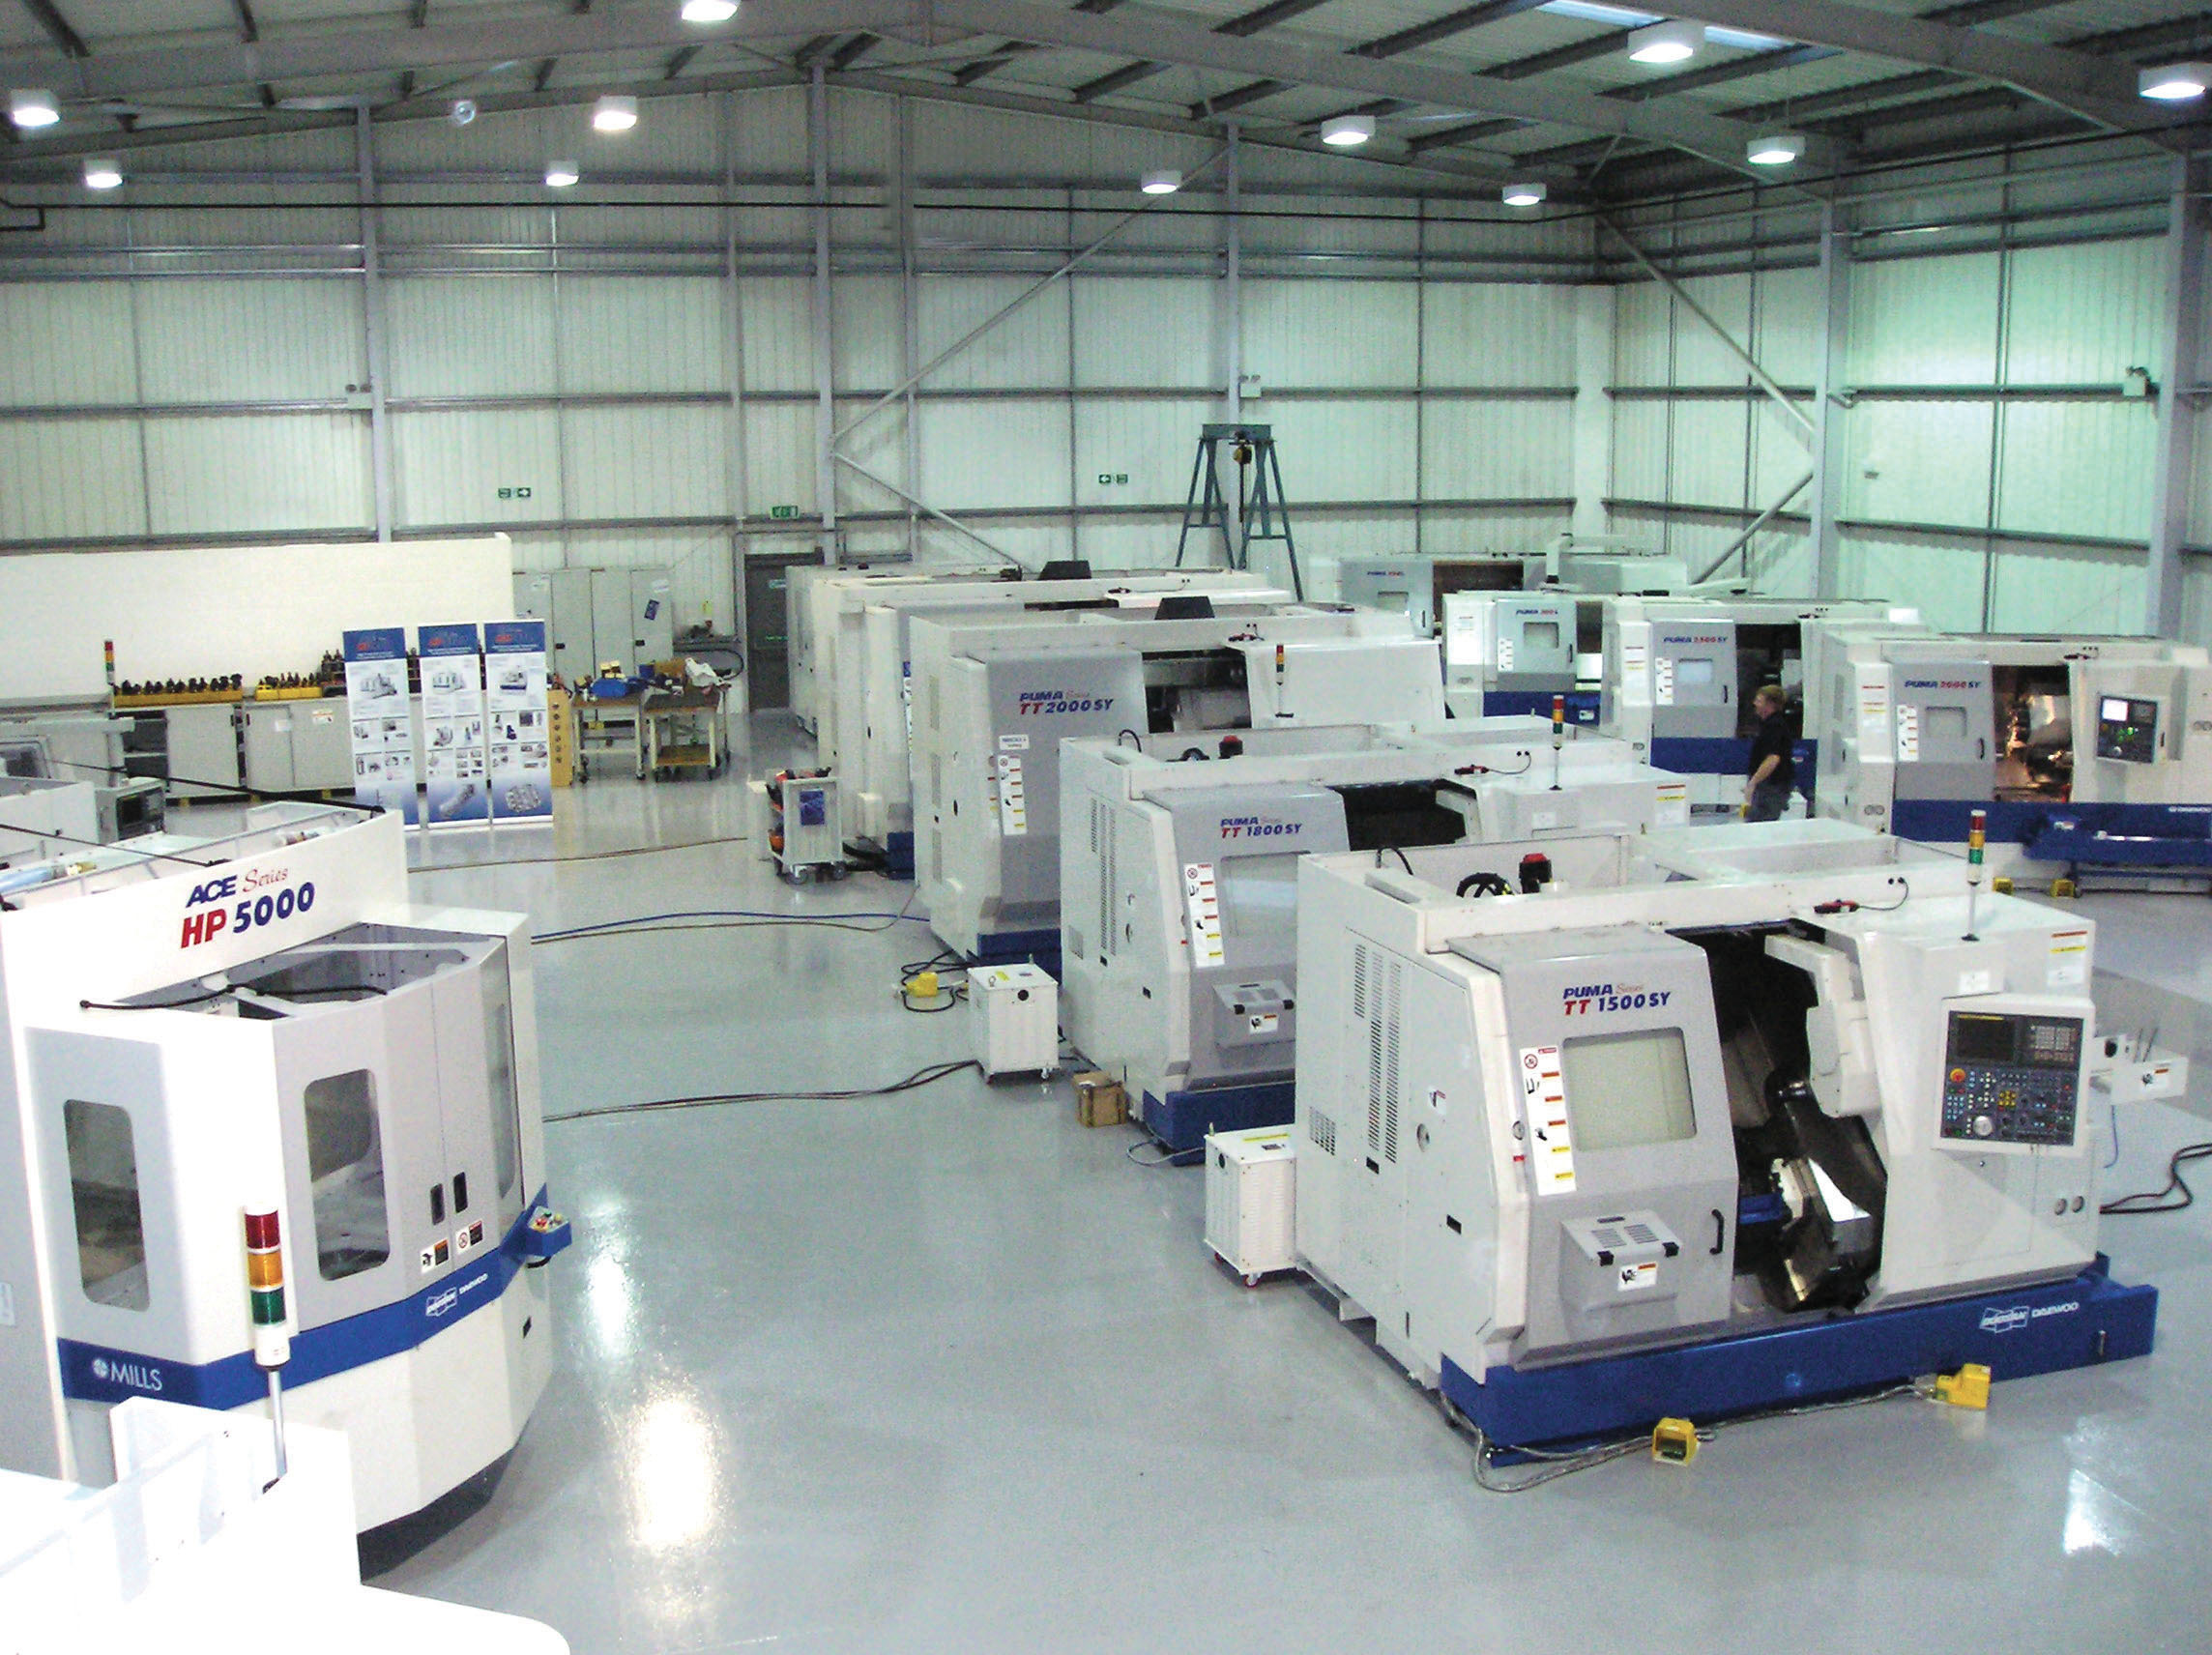 Mills CNC demo room with CNC machines ready for demonstration